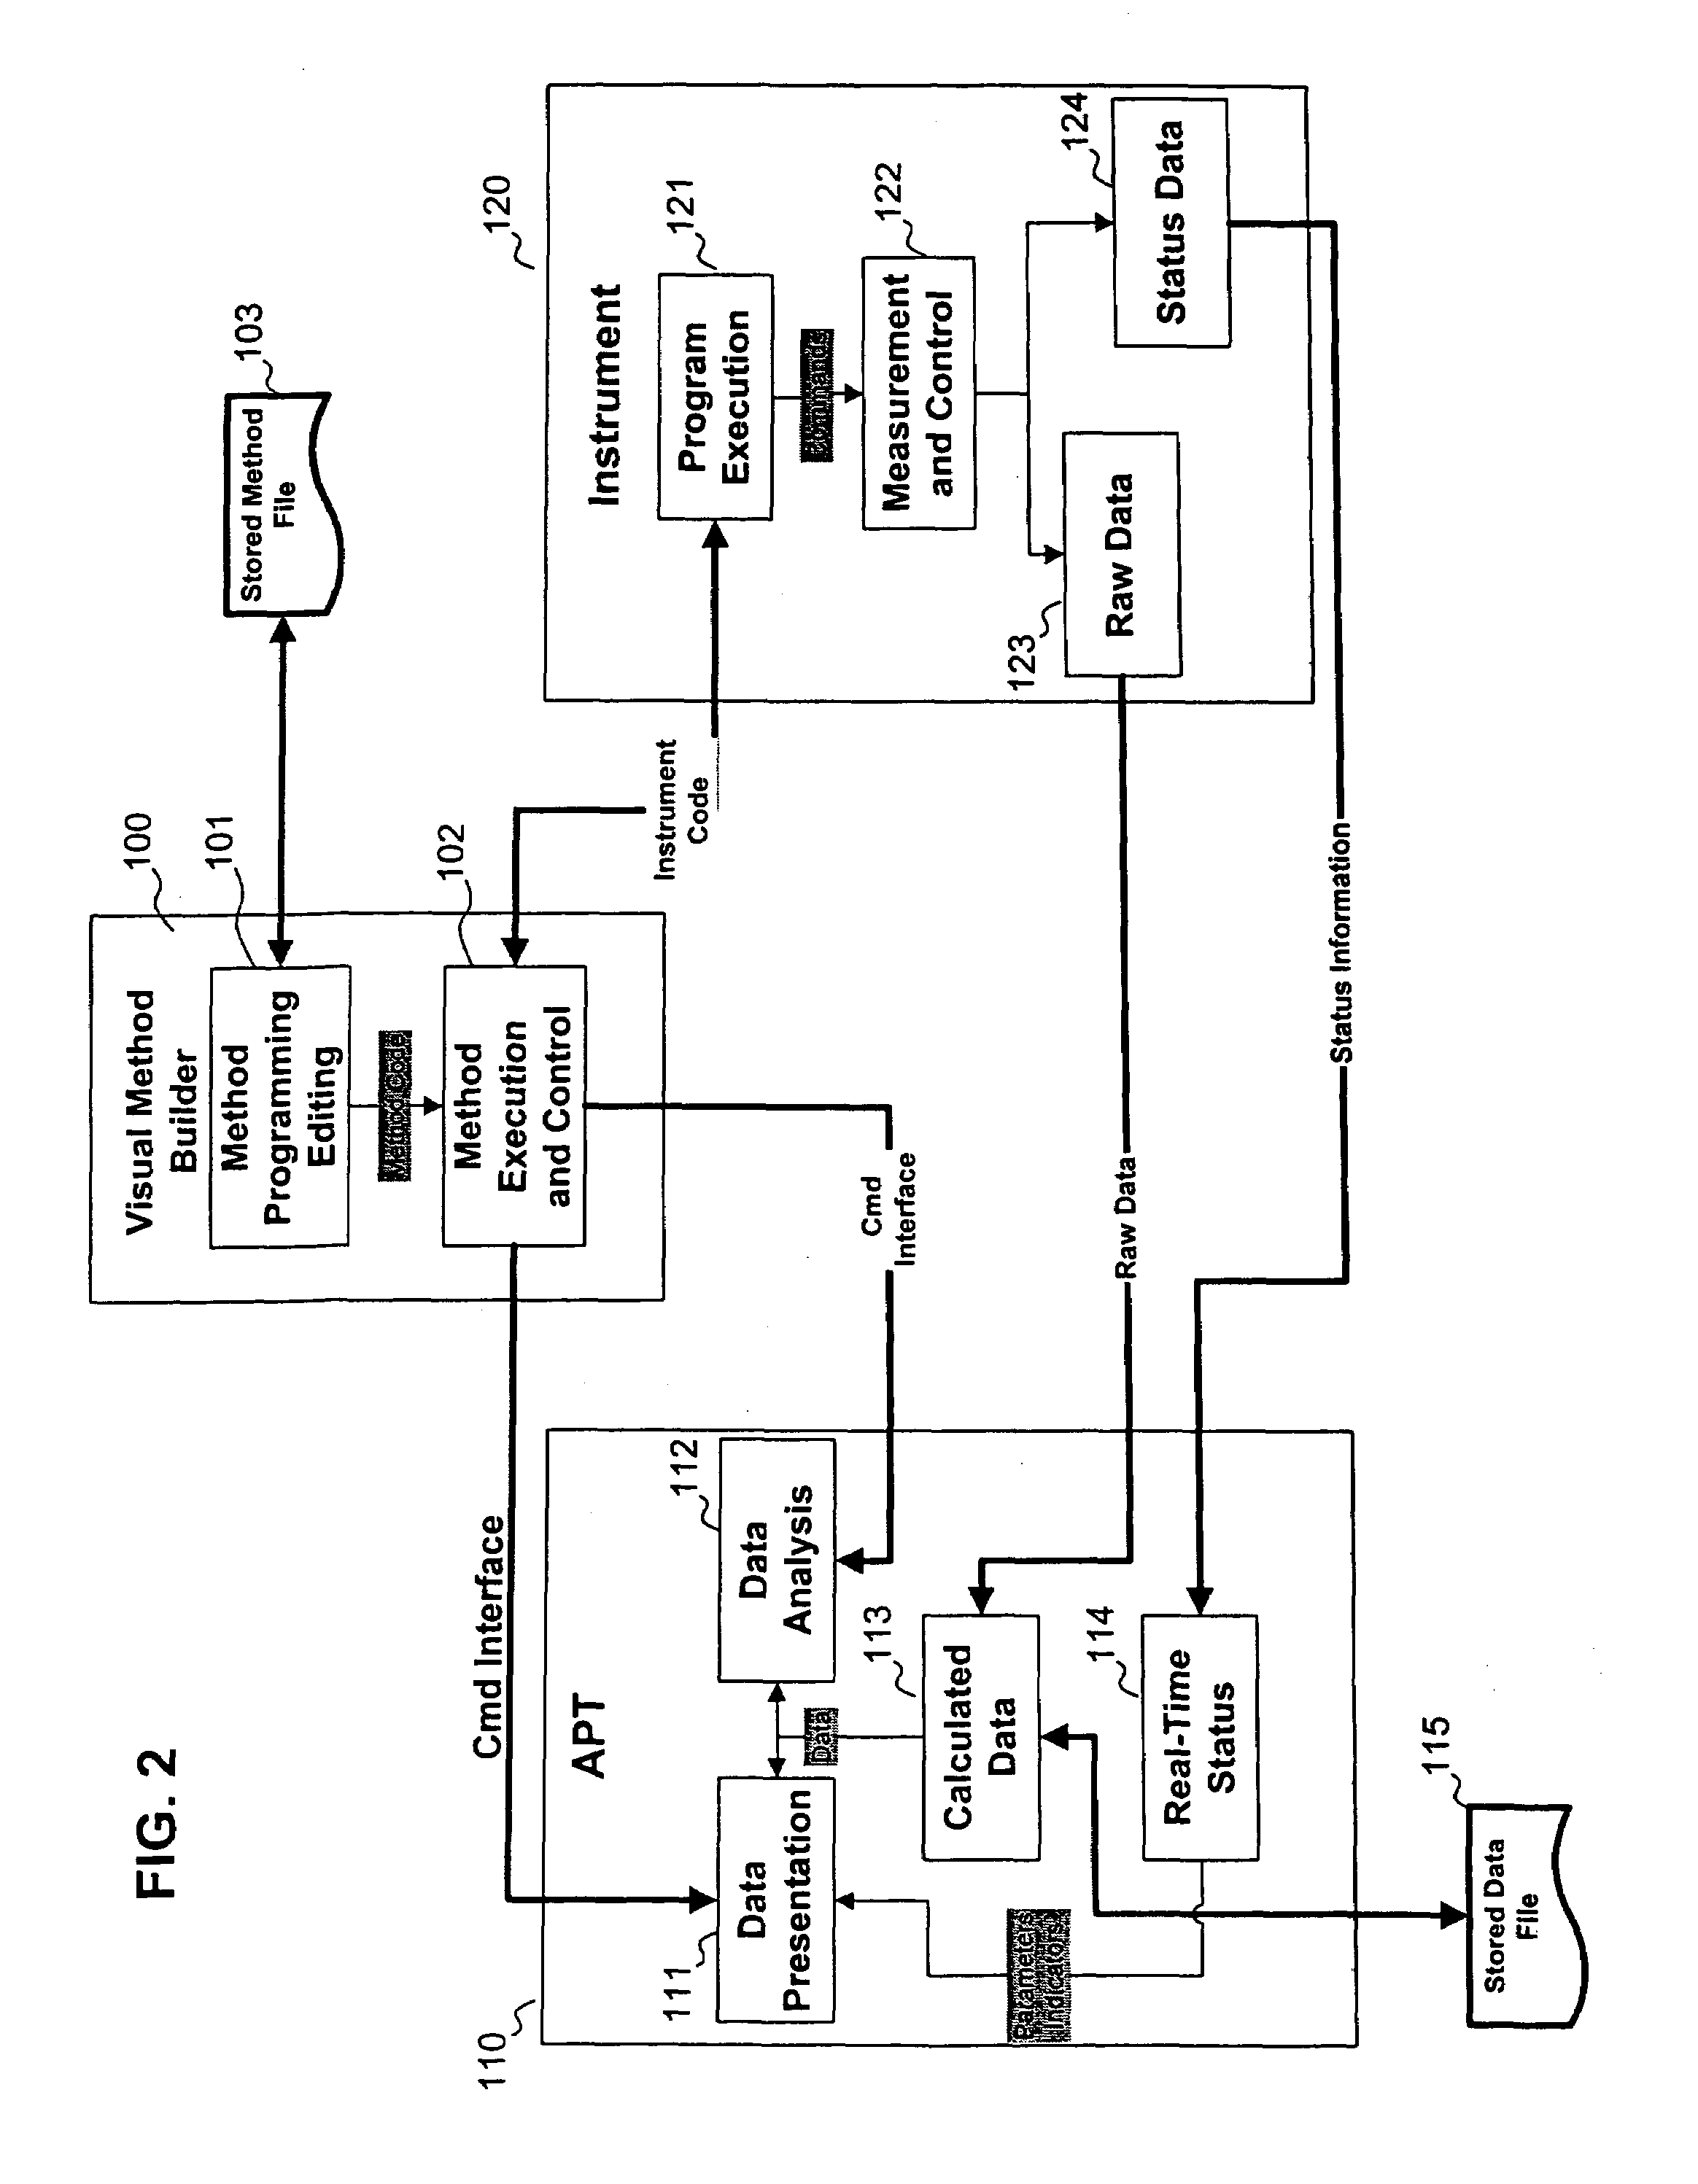 System and method for dynamically controlling operation of rheometric instruments